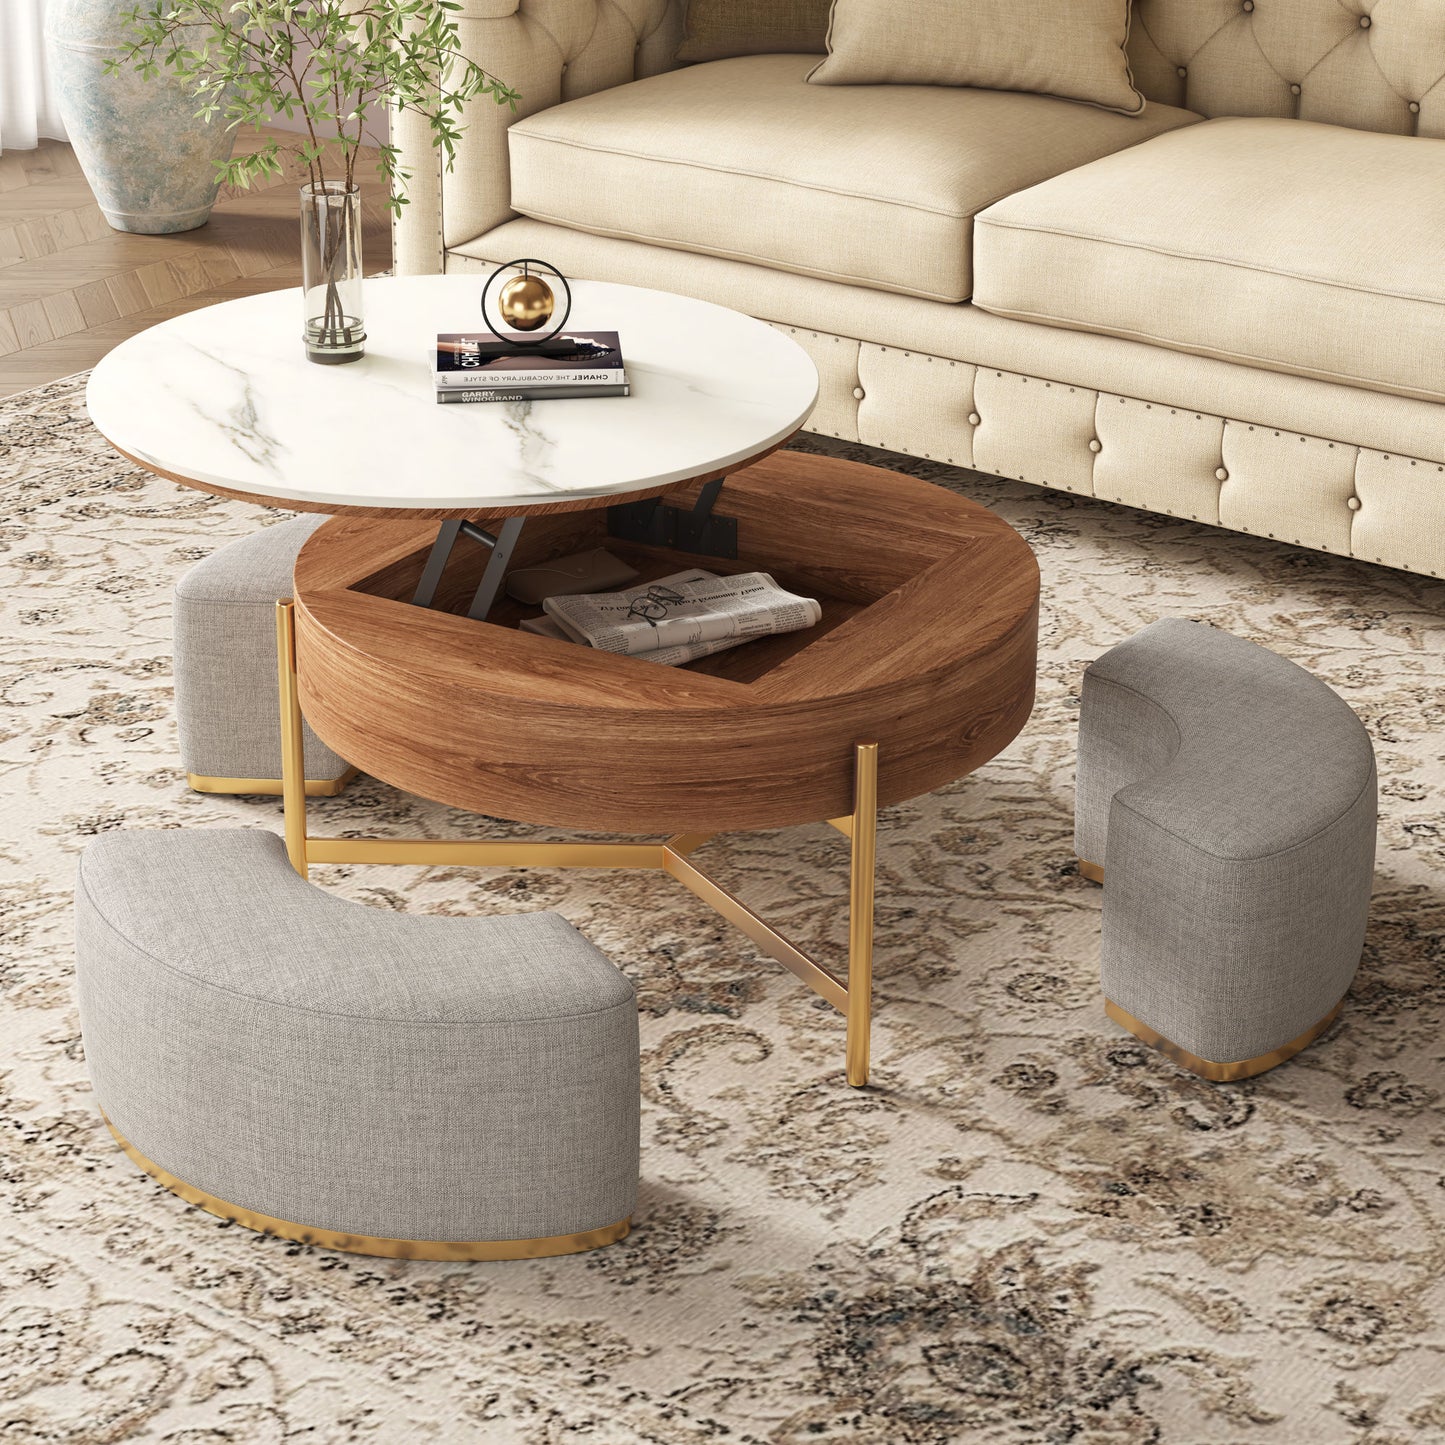 Modern Nesting Coffee Table Set with Sintered Stone Top, Lift-top Coffee Table 37"